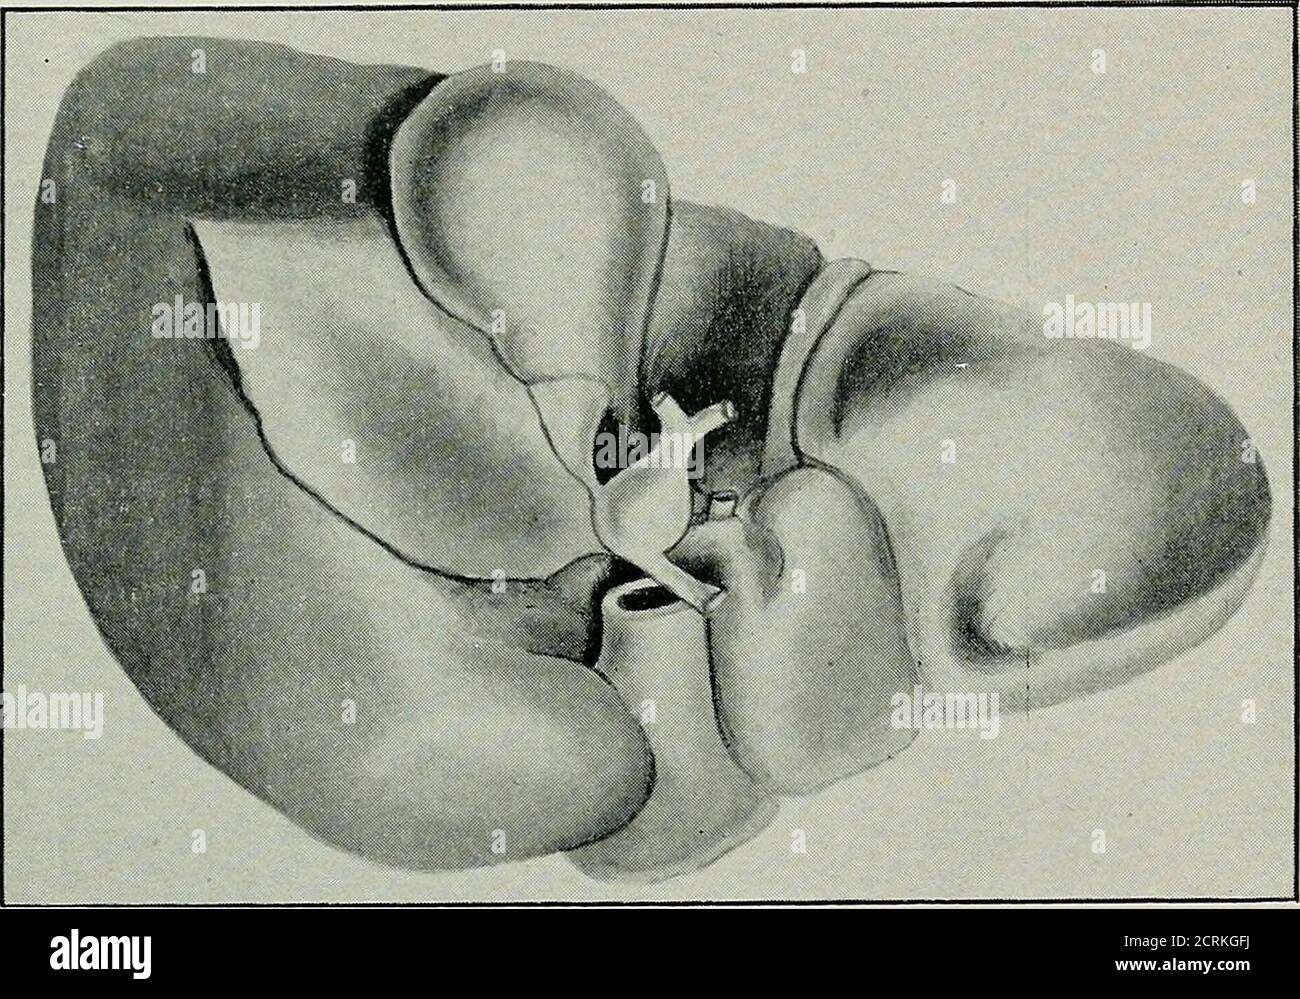 . Diseases of the gall-bladder and bile-ducts, including gall-stones . e for operation. When seen she was so ill that it was not considered safeto employ a general anaesthetic, especially as it was almostcertain she was now the subject of malignant disease as wellas gall-stones. The operation was done on July 20, cocaine being theonly anaesthetic used. The gall-bladder was aspirated, in-cised, and stitched to the parietes in the usual way, noattempt being made, on account of the weak condition ofthe patient, to exactly localize the obstruction. TUMOURS OF THE GALL-BLADDER AND BILE-DUCTS 147 No Stock Photo